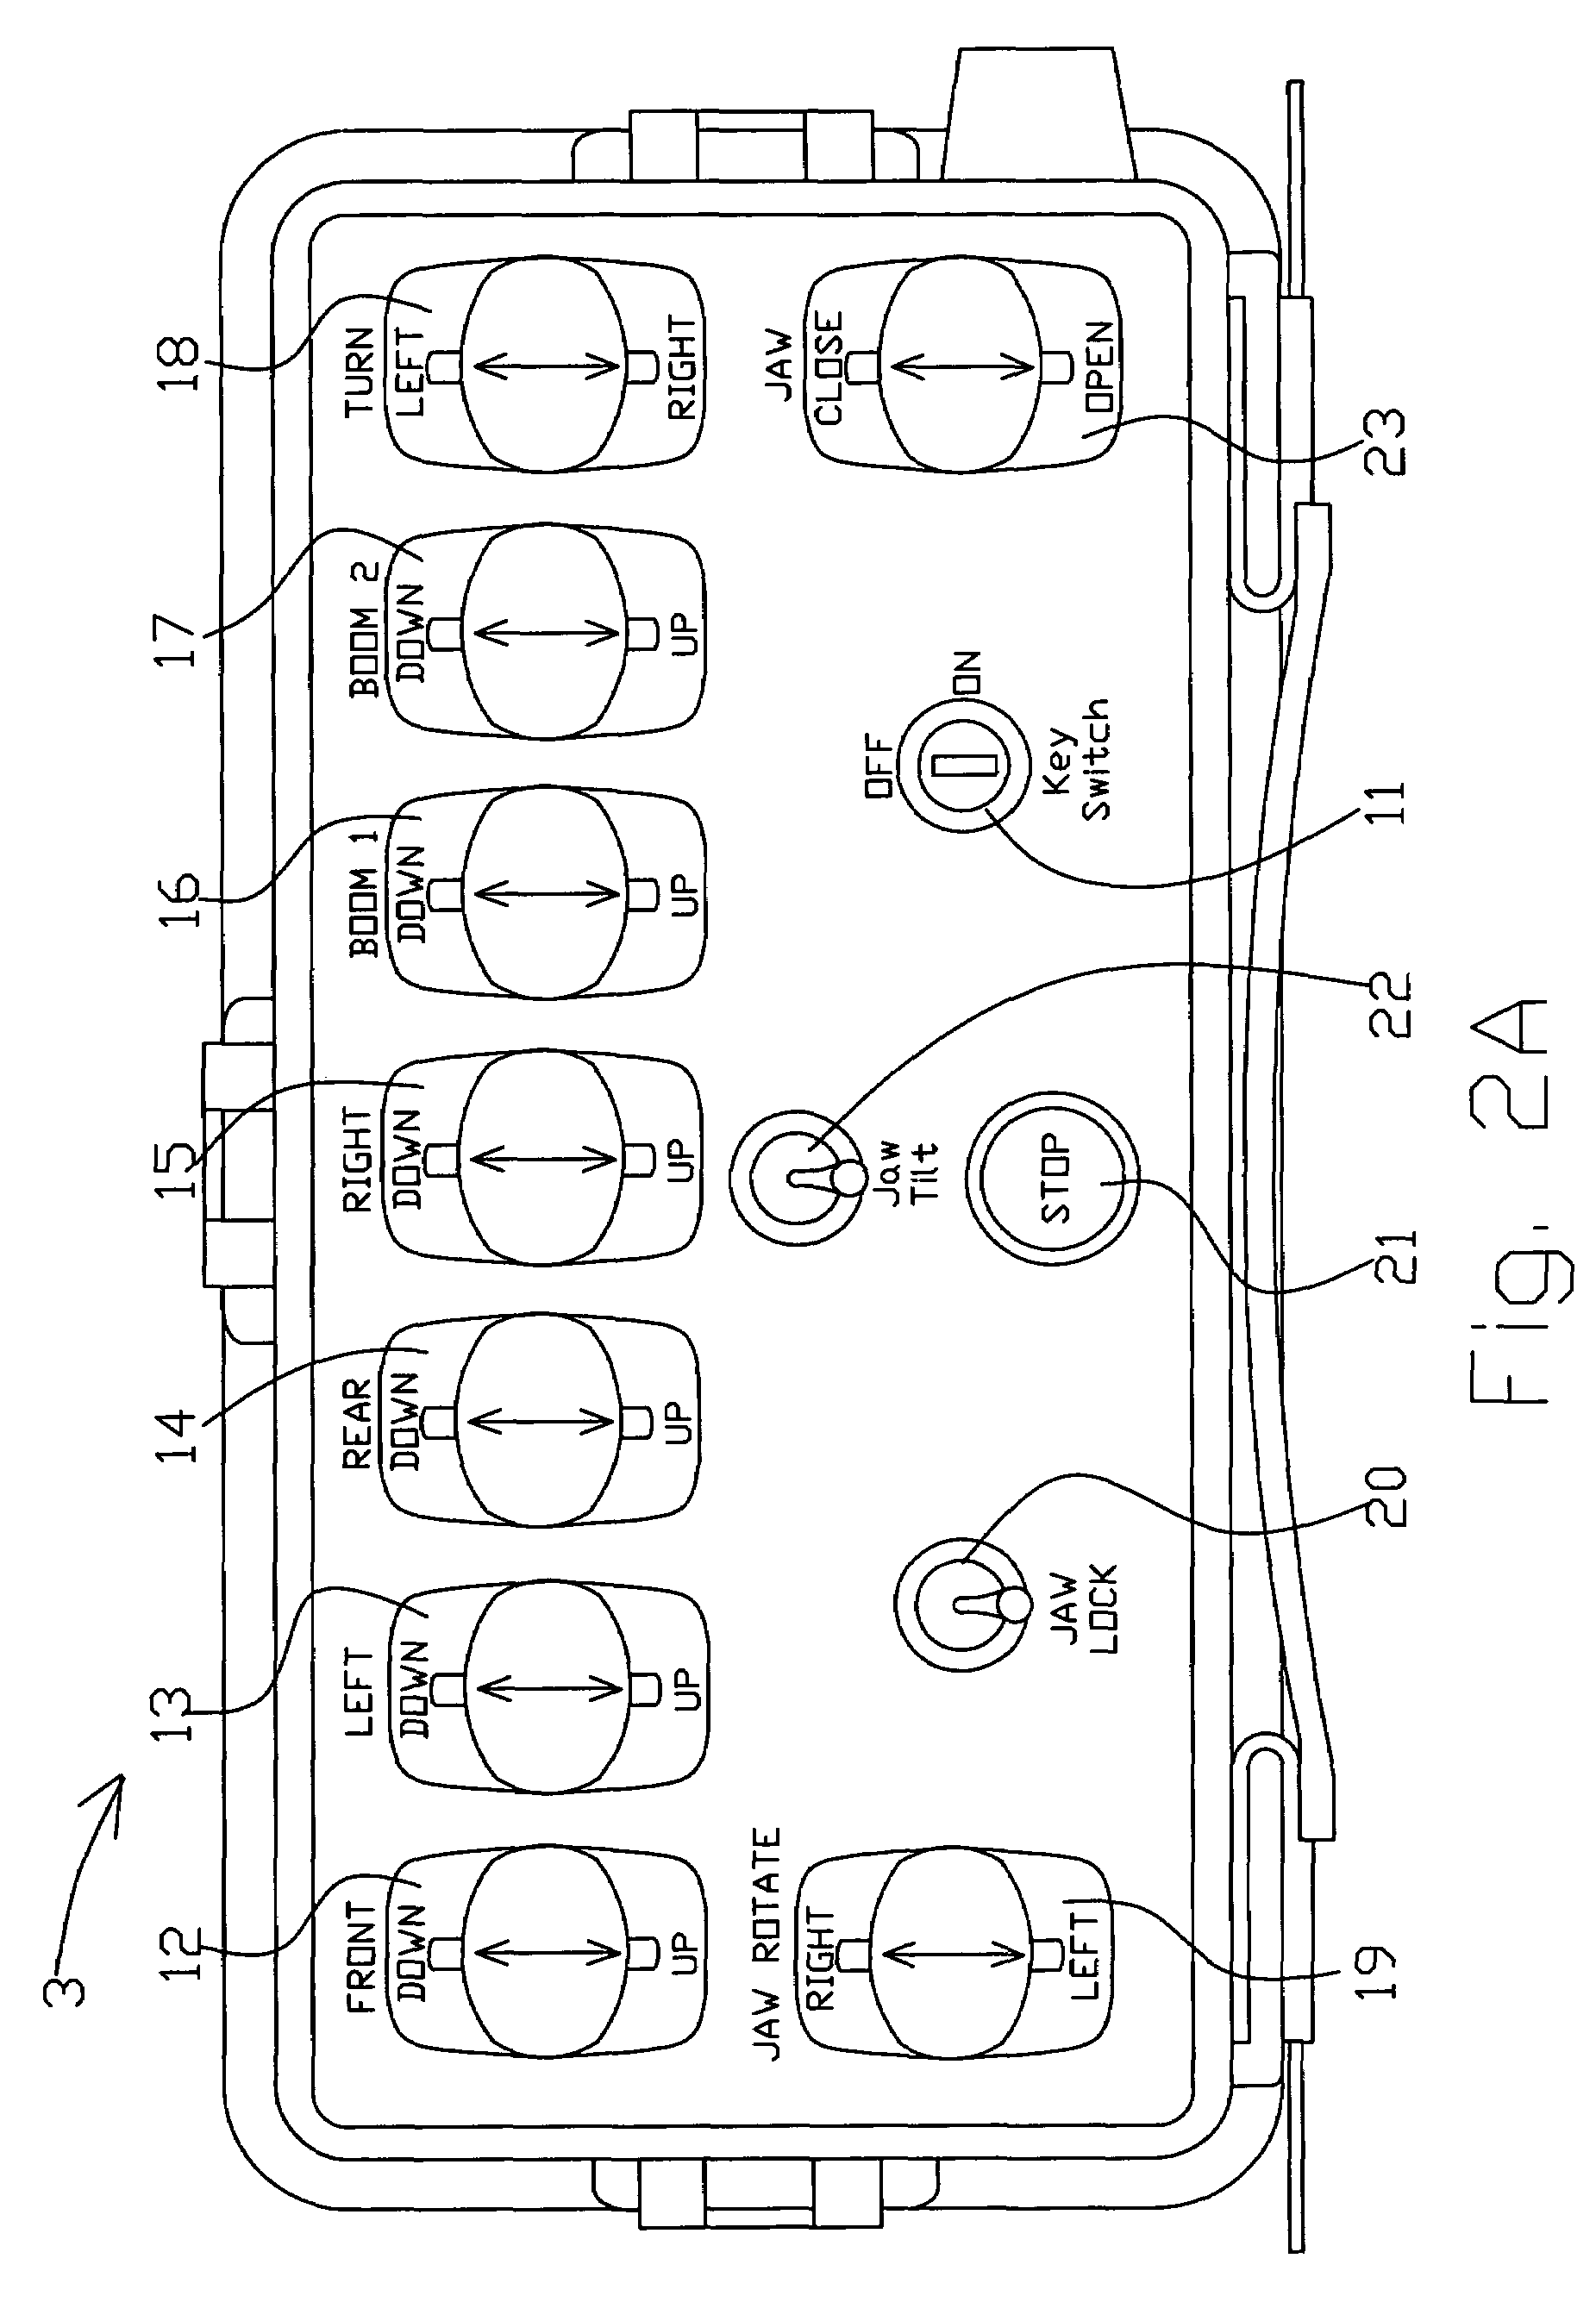 Remotely operated, underwater non-destructive ordnance recovery system and method